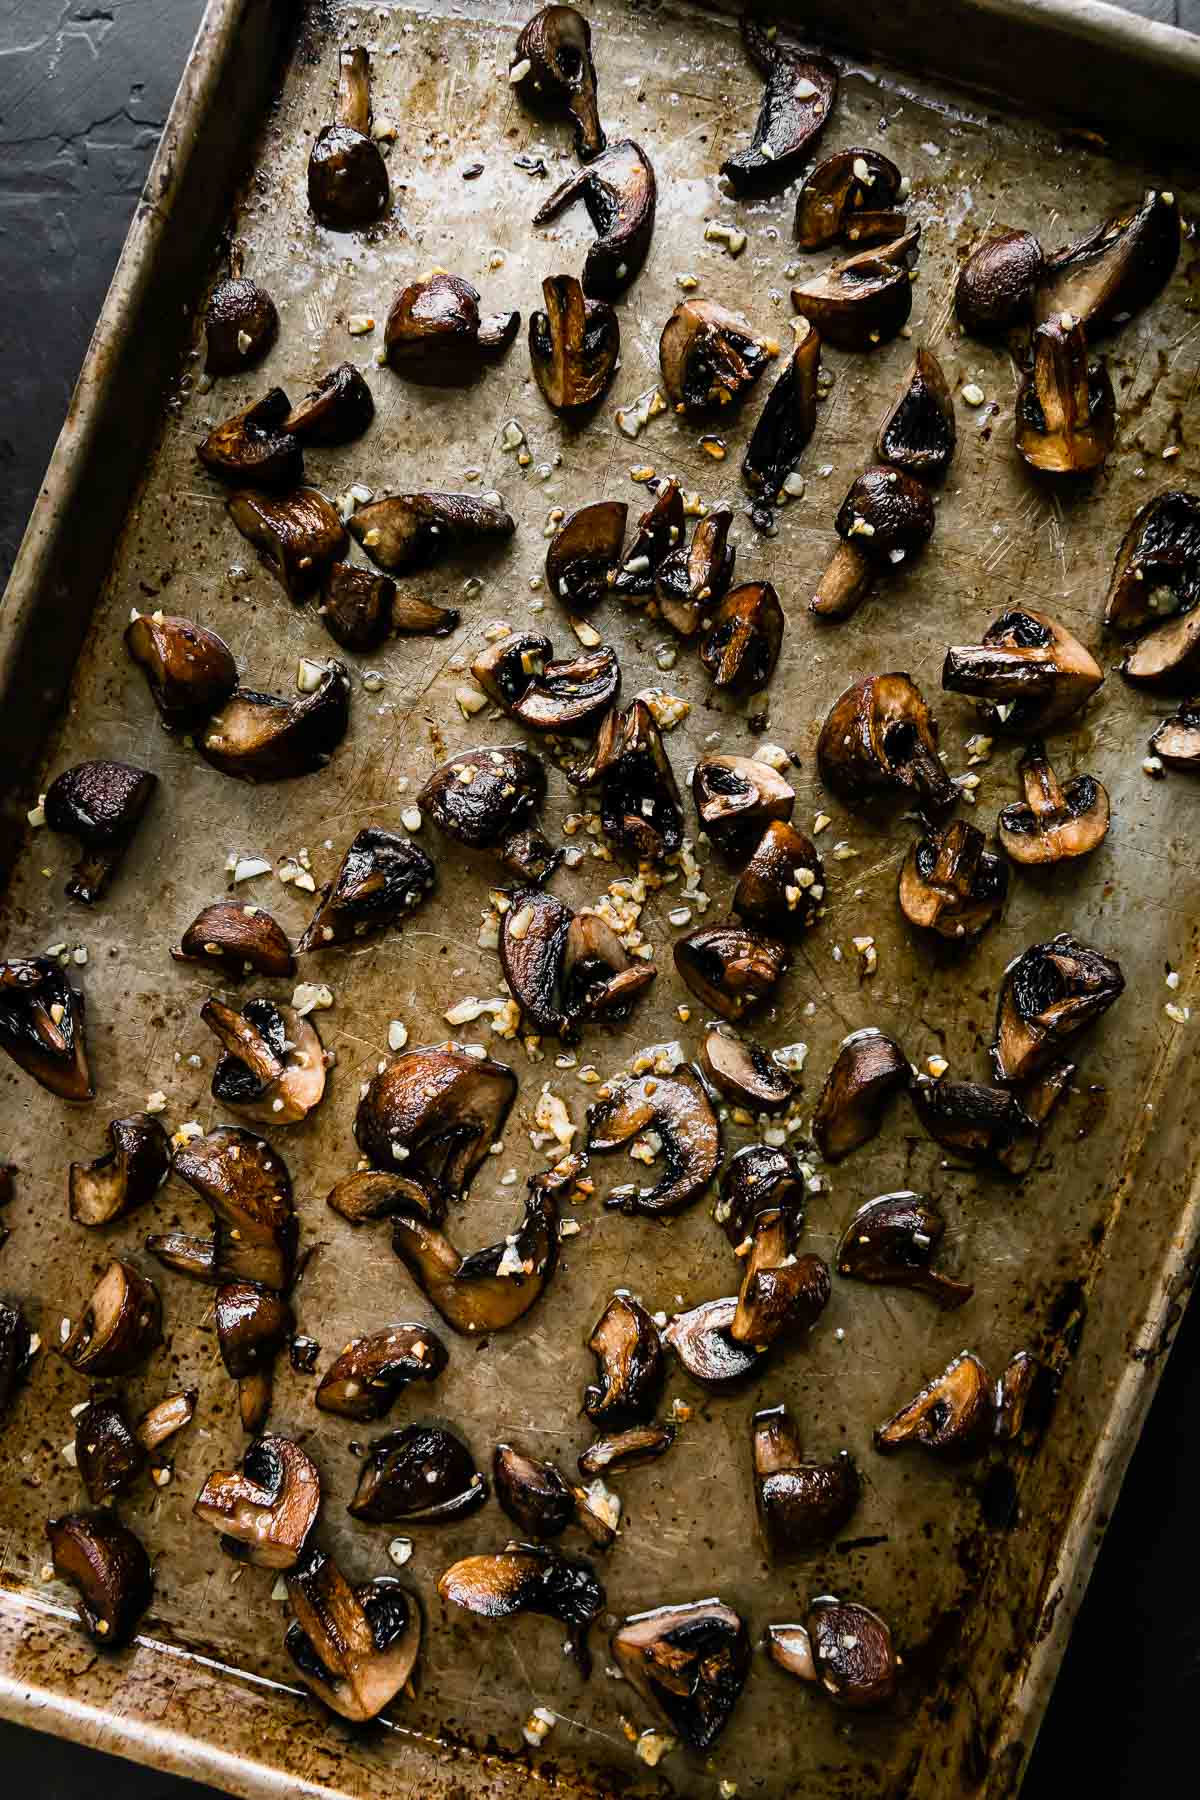 Crispy roasted mushrooms are arranged atop a metal baking sheet. The baking sheet sits atop a black textured surface.